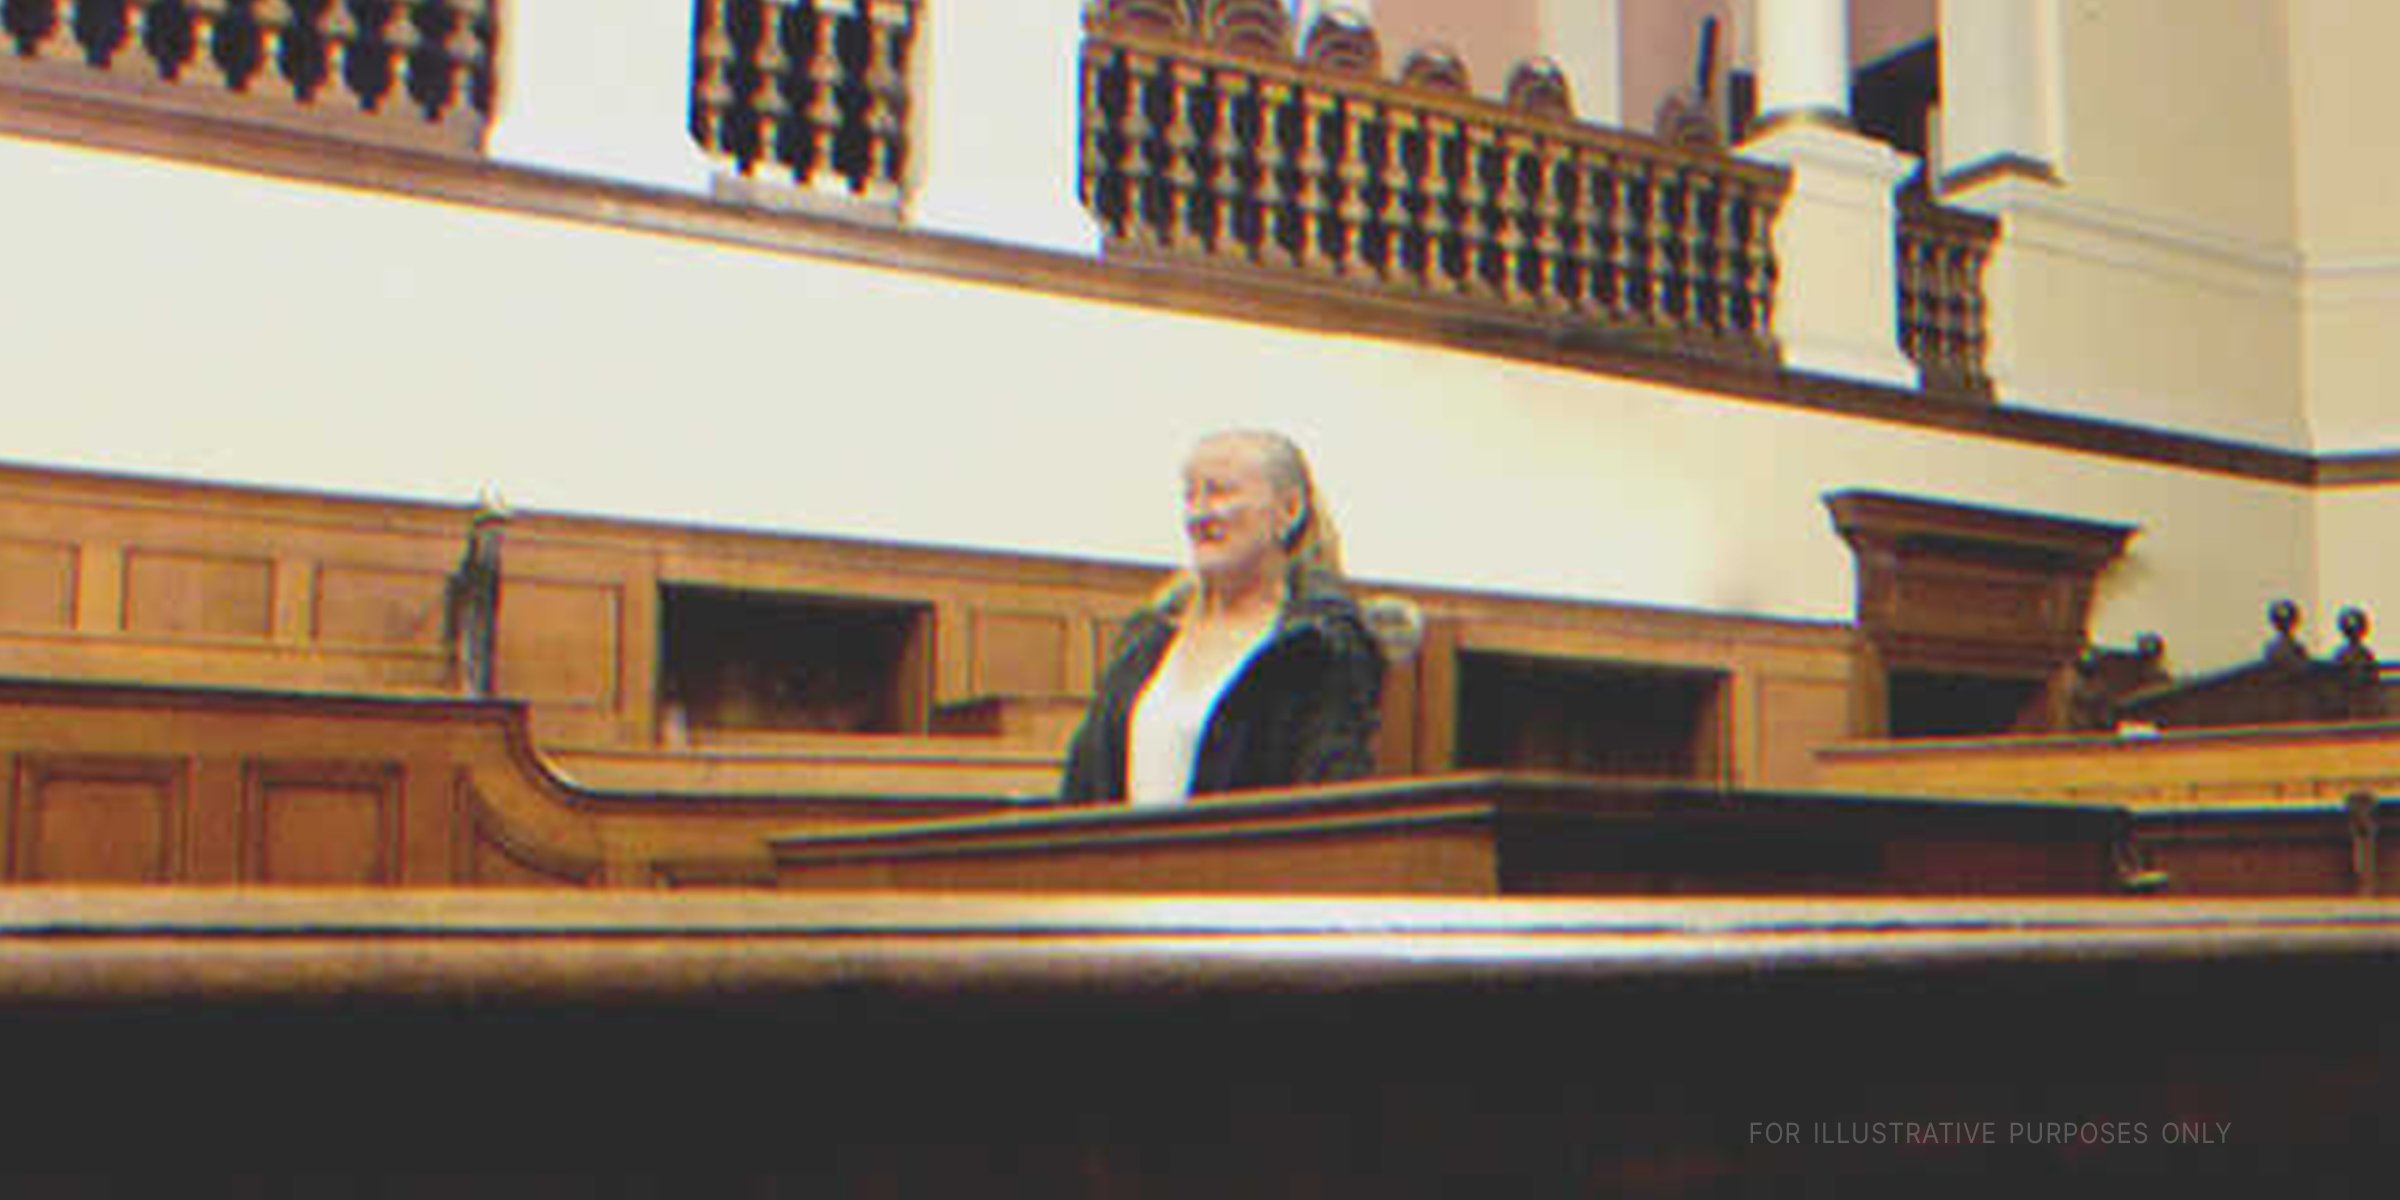 An older woman in courtroom | Source: Flickr / Lee J Haywood (CC BY-SA 2.0) 